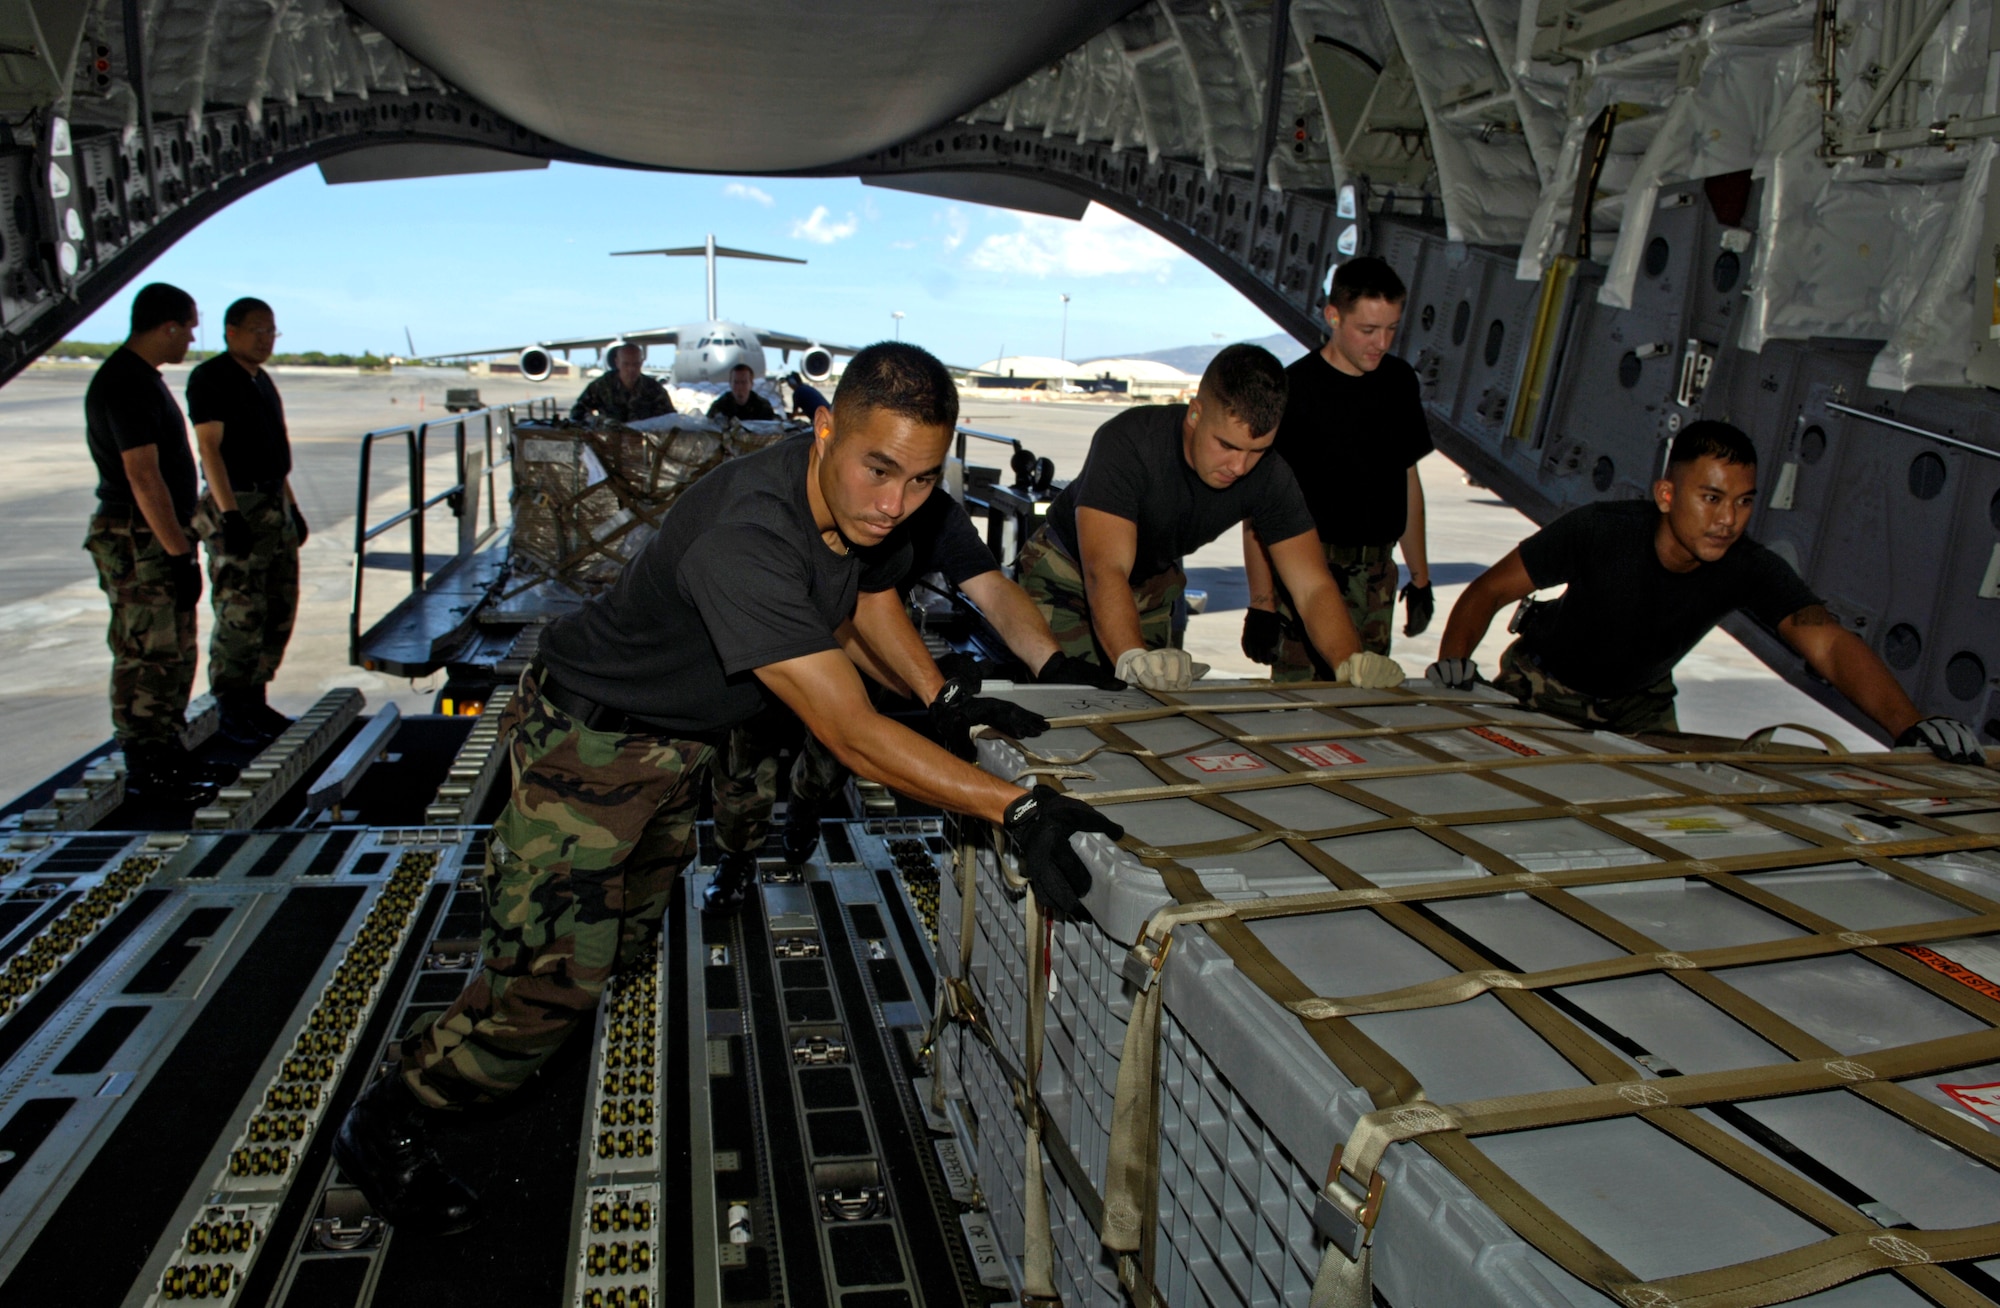 Airmen from the 15th Civil Engineer Squadron load pallets of equipment on a C-17 Globemaster III at Hickam Air Force Base, Hawaii, Sept. 12. The C-17 took a 53-person team comprised of CE, Defense Department employees and contractors to assess damage left by Super Typhoon Ioke after it struck Wake Island Aug. 31. (U.S. Air Force photo/Tech. Sgt. Shane A. Cuomo) 